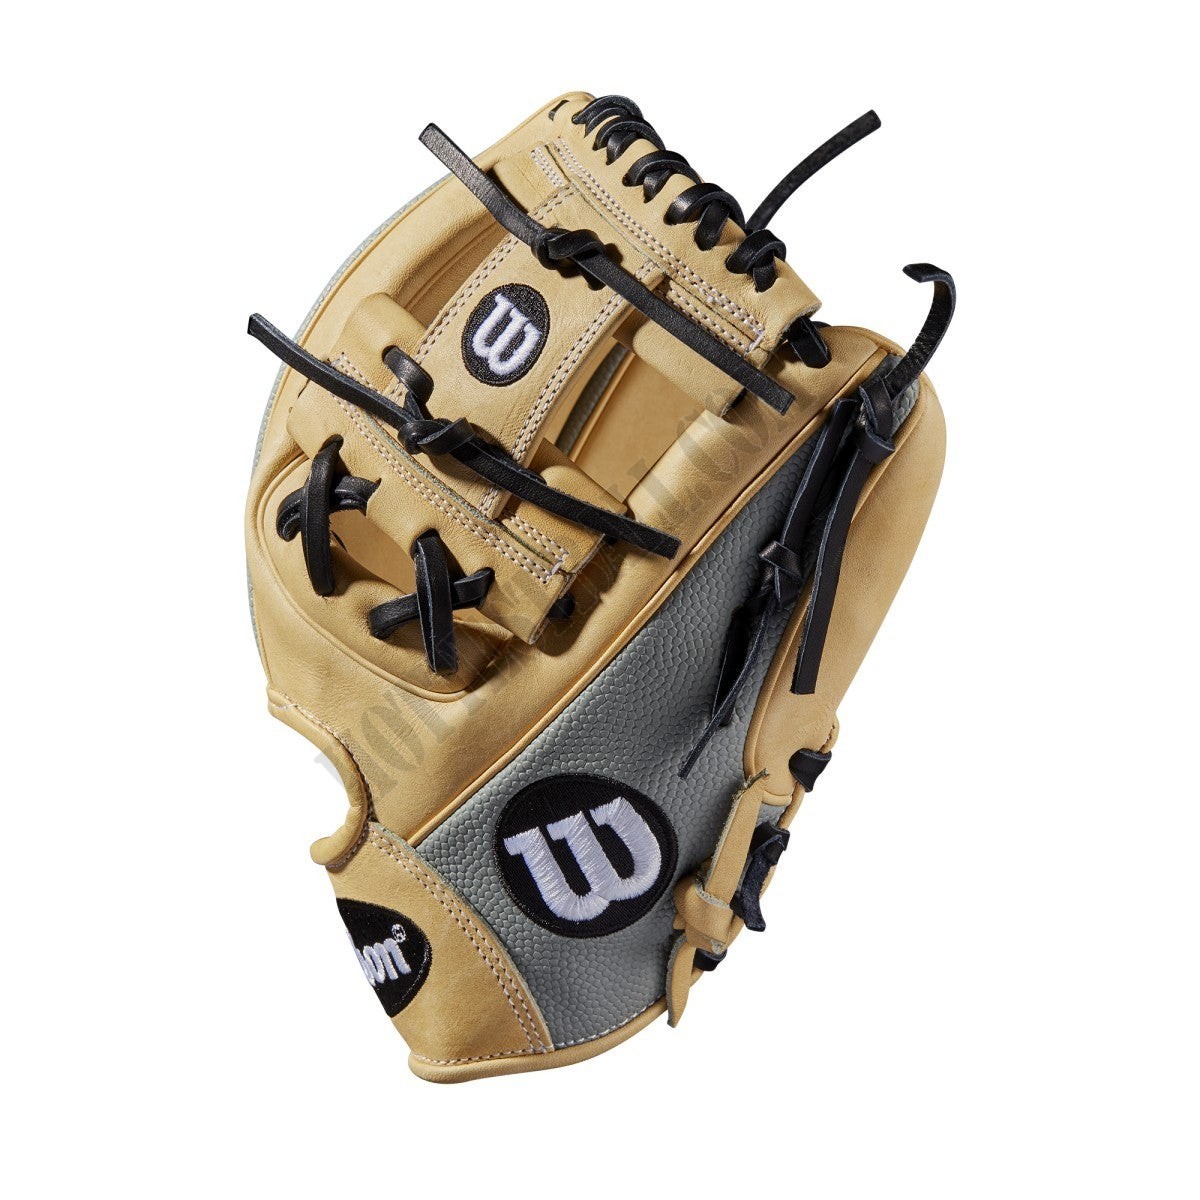 2019 A2000 1788 SuperSkin 11.25" Infield Baseball Glove - Right Hand Throw ● Wilson Promotions - -3